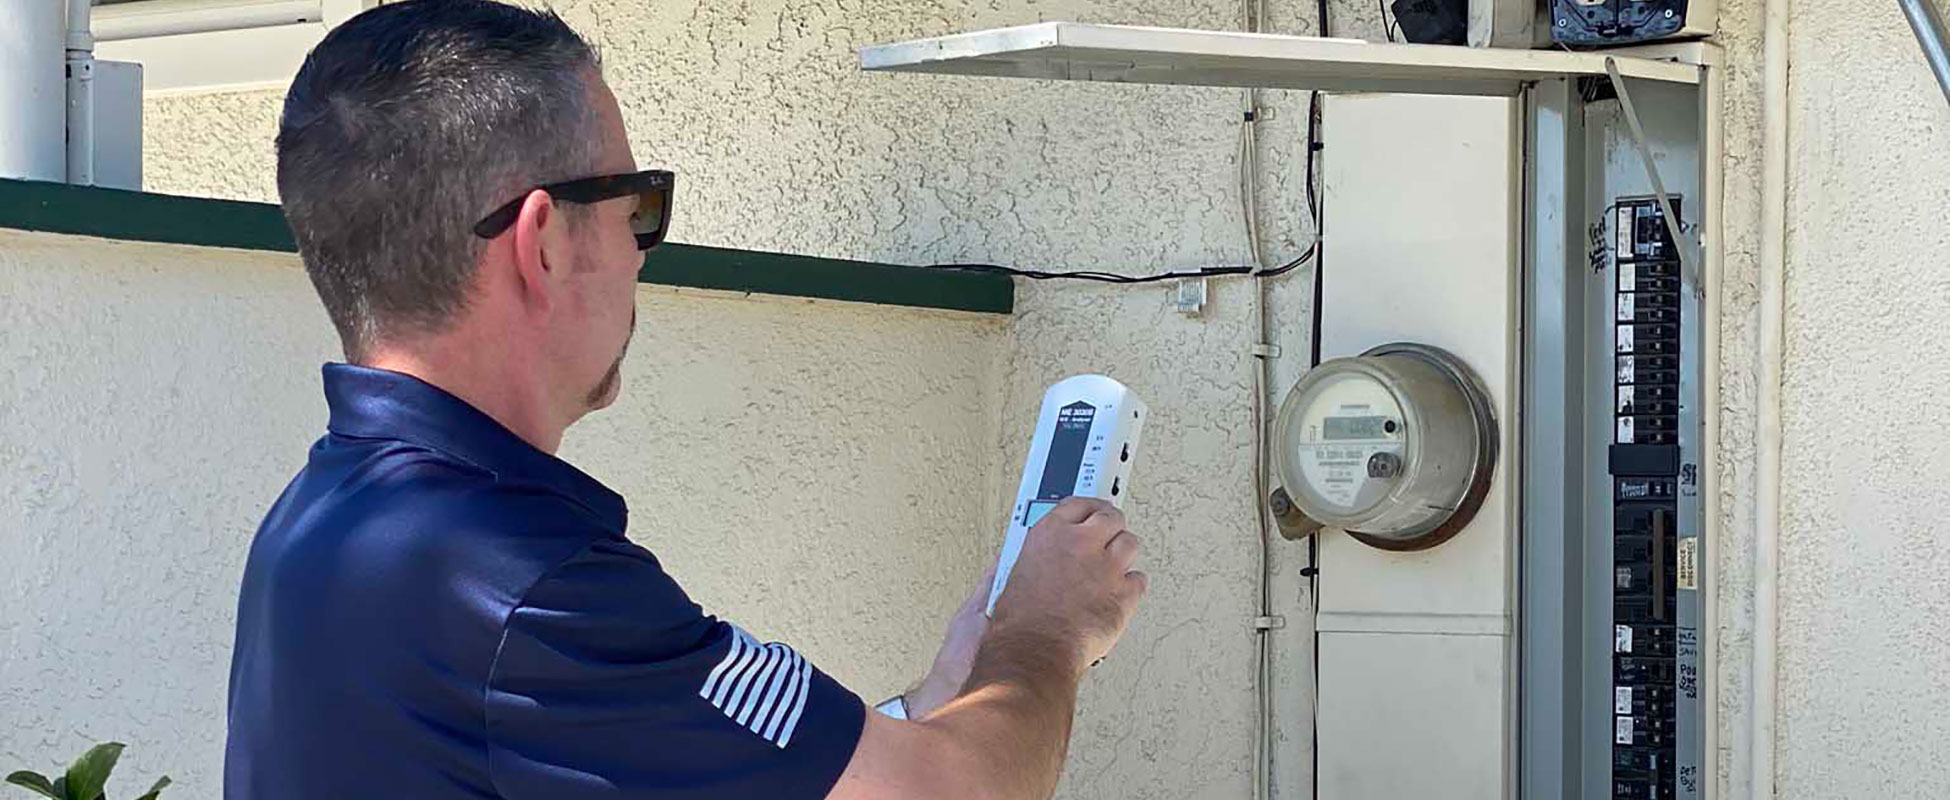 home-inspections-los-angeles-property-inspections-electrical-termite-inspections-roof-inspections-Elite-Group-Inspection-Professionals